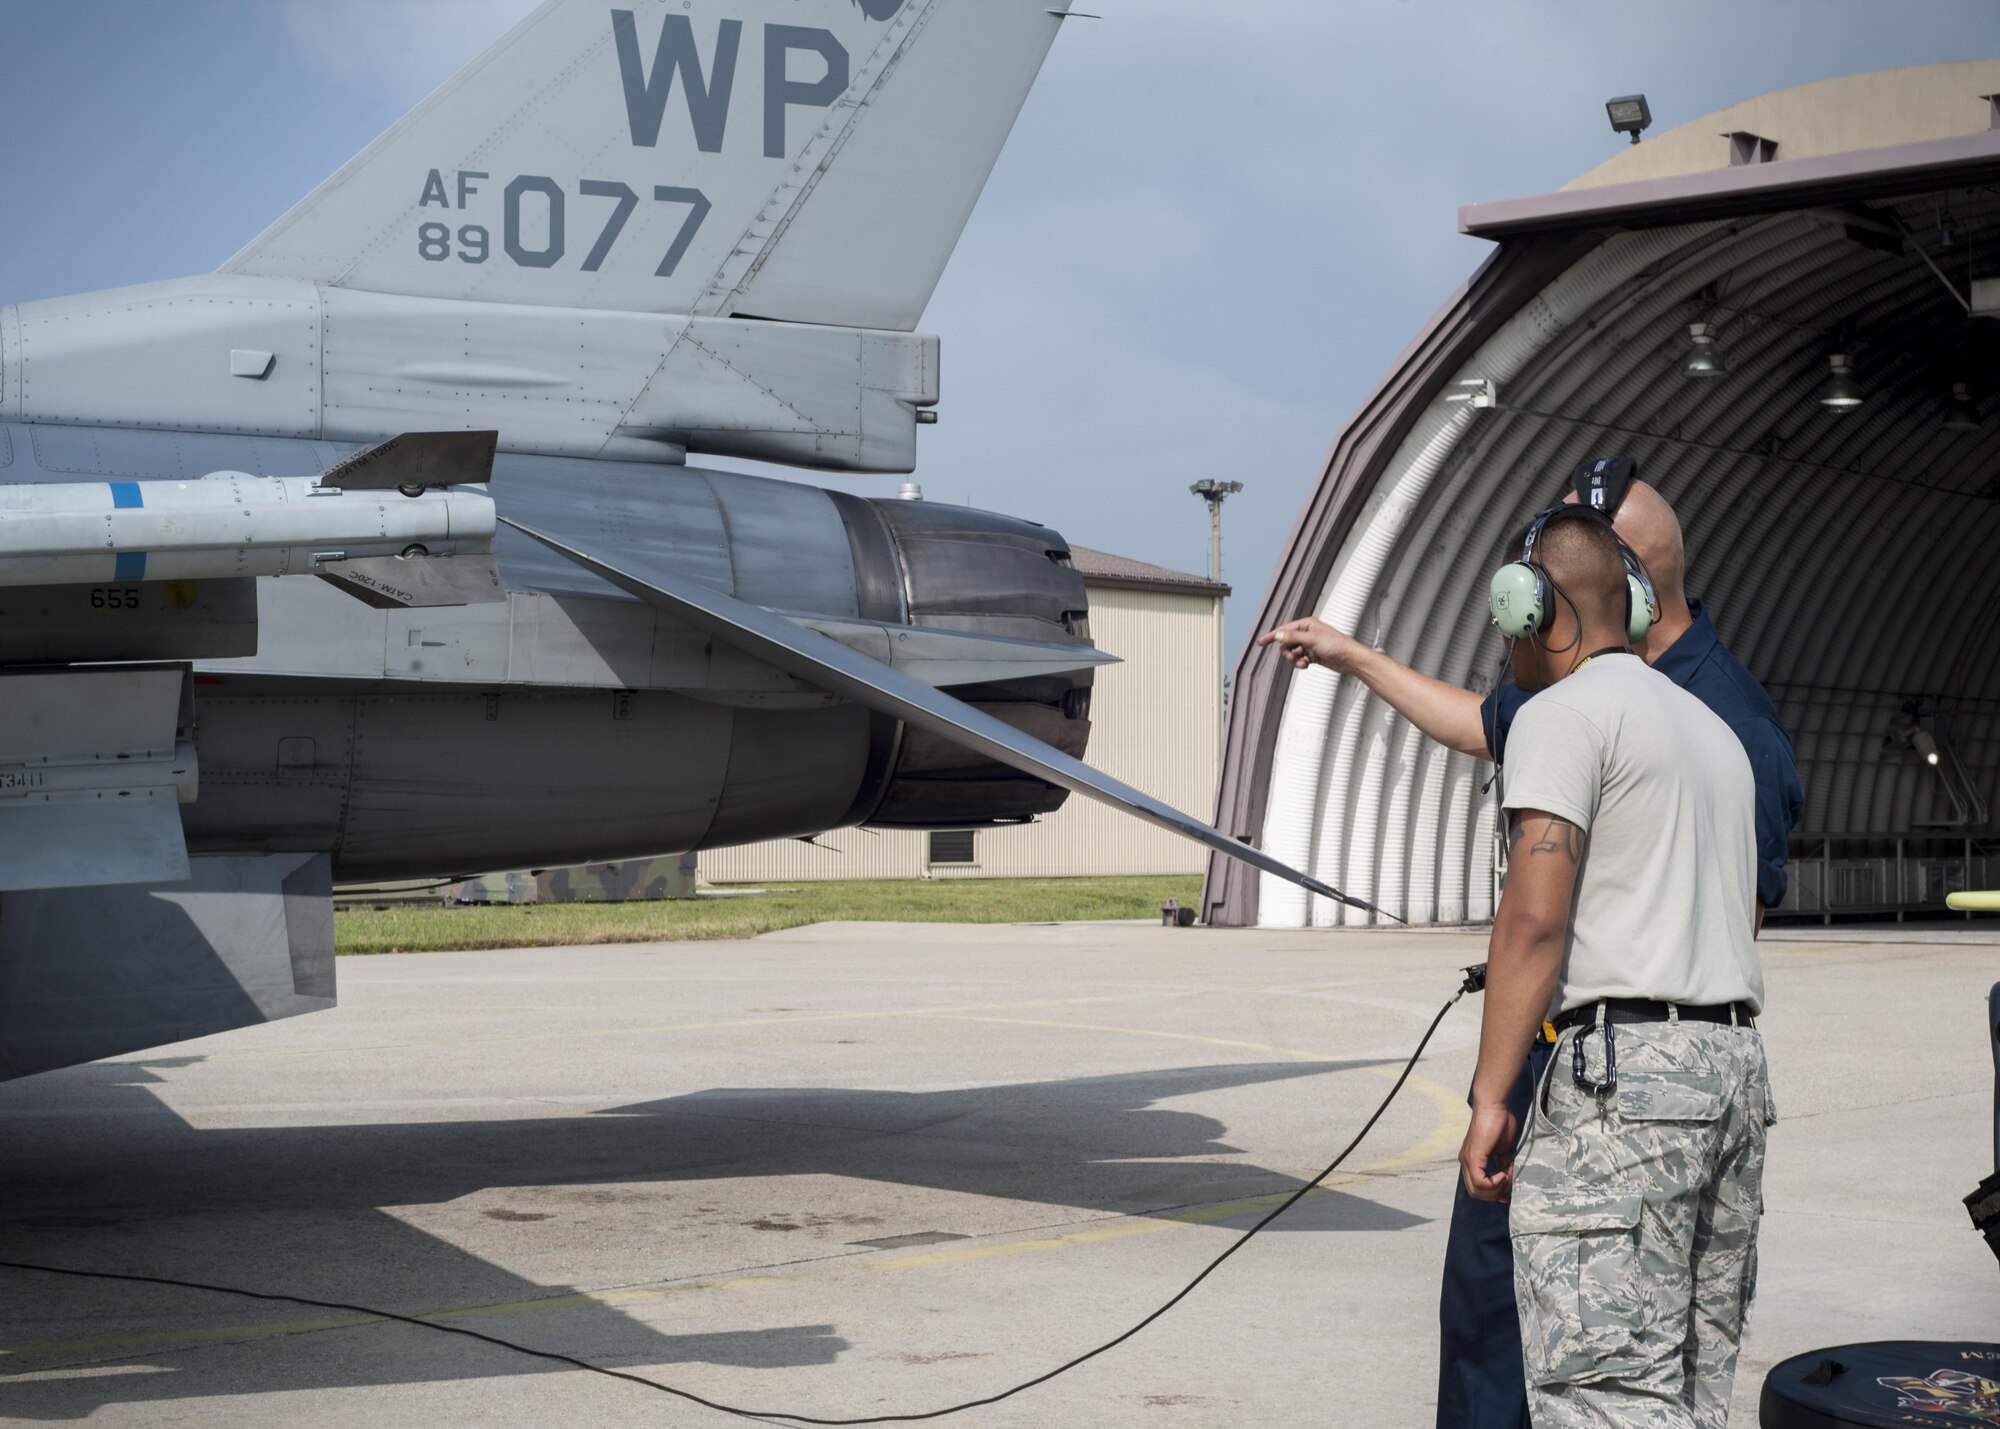 U.S. Air Force Staff Sgt. Eugene Travis, 8th Air Maintenance Squadron crew chief, briefs Airman 1st Class Anthony Martinez, 8th Security Forces Squadron defender, while participating in the “Job Swap” event at Kunsan Air Base, Republic of Korea, Sept. 12, 2017. The event aimed to give a hands-on look at the mission that 8th SFS defenders are supporting and protecting. (U.S. Air Force photo by Staff Sgt. Victoria H. Taylor)